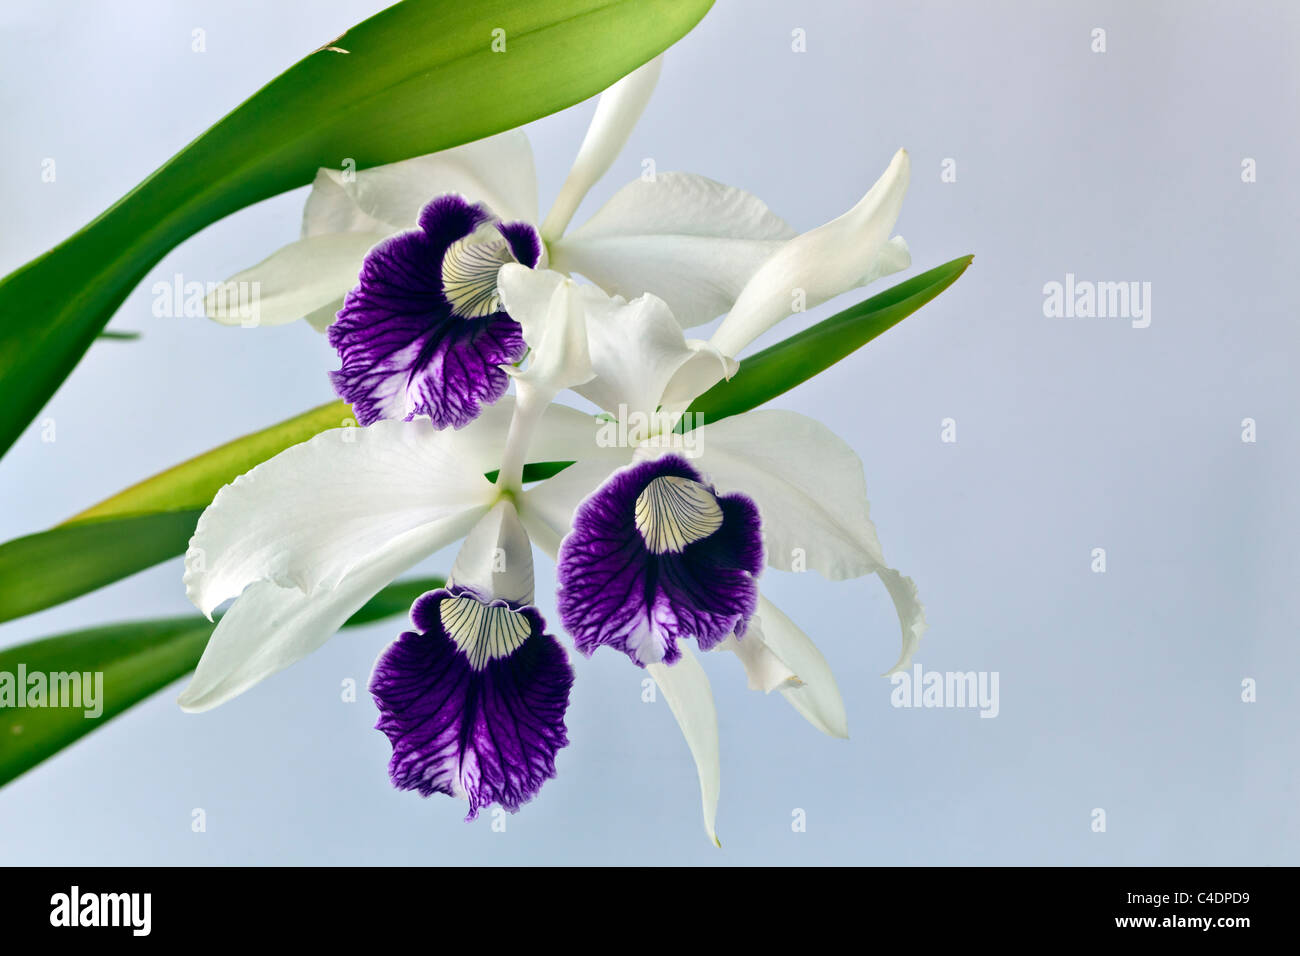 Cattleya orchid in studio setting with white background Stock Photo